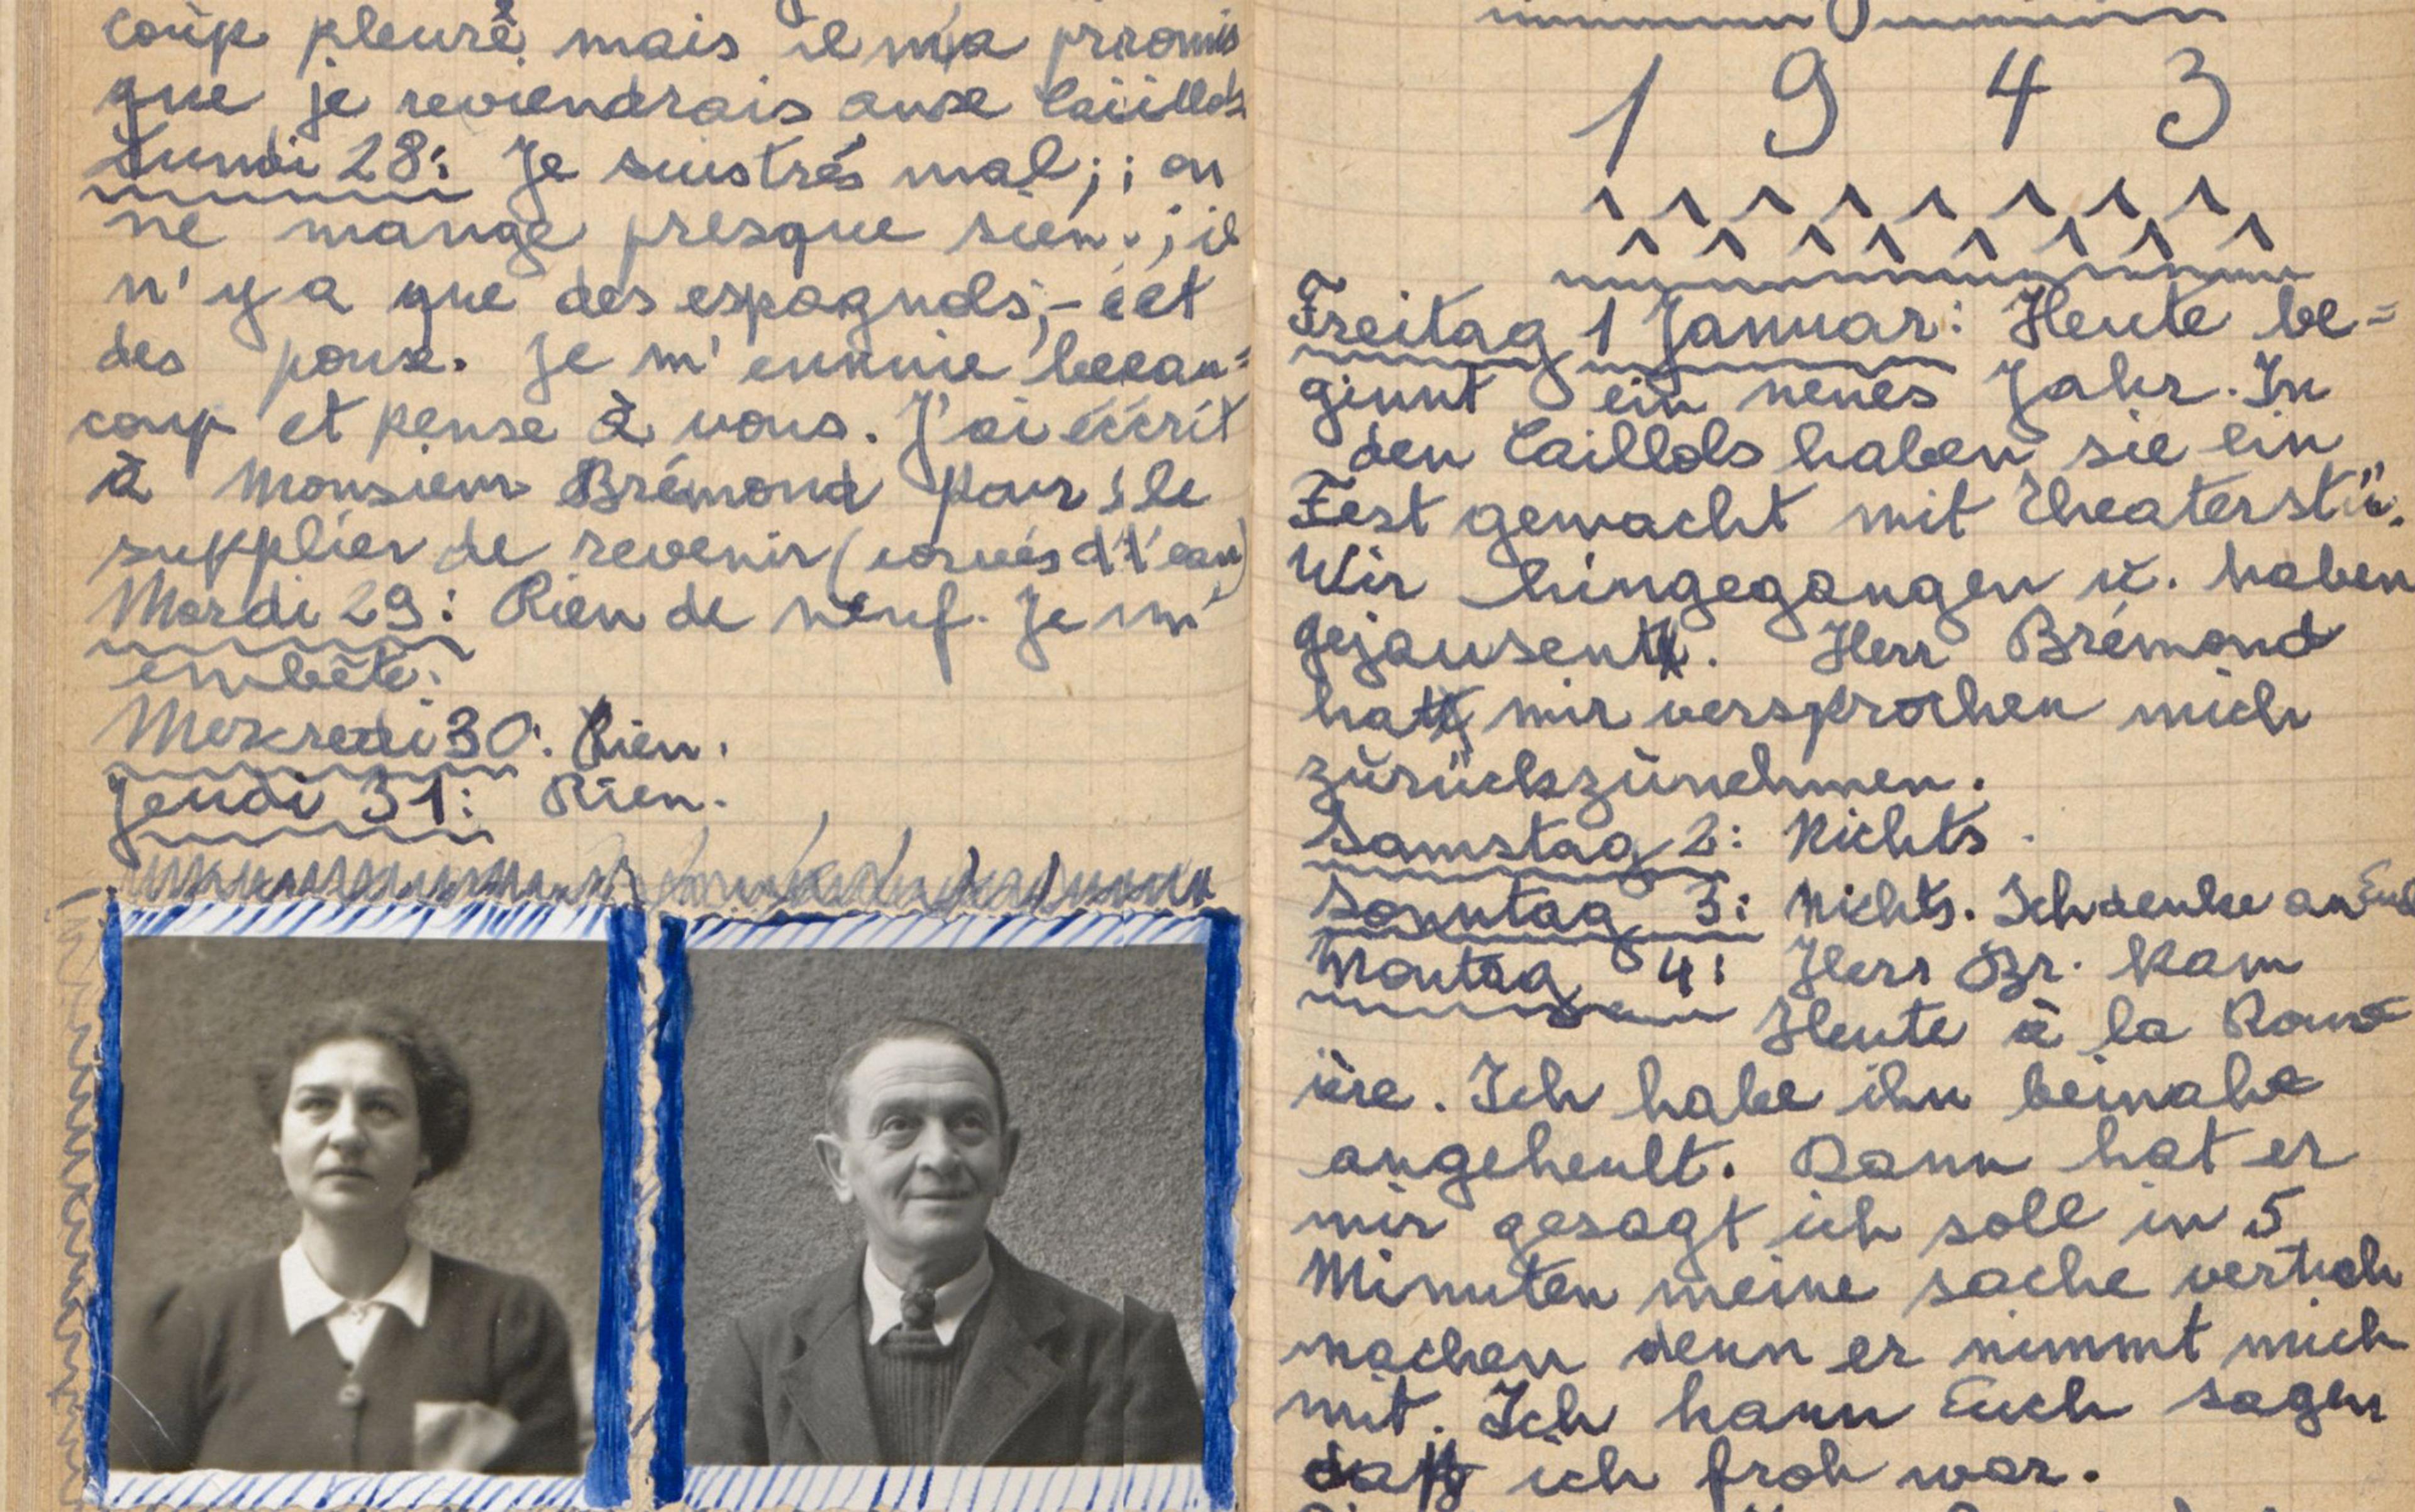 A diary page from 1943, featuring handwritten text in French and German and two small black-and-white photographs of a man and a woman at the bottom.